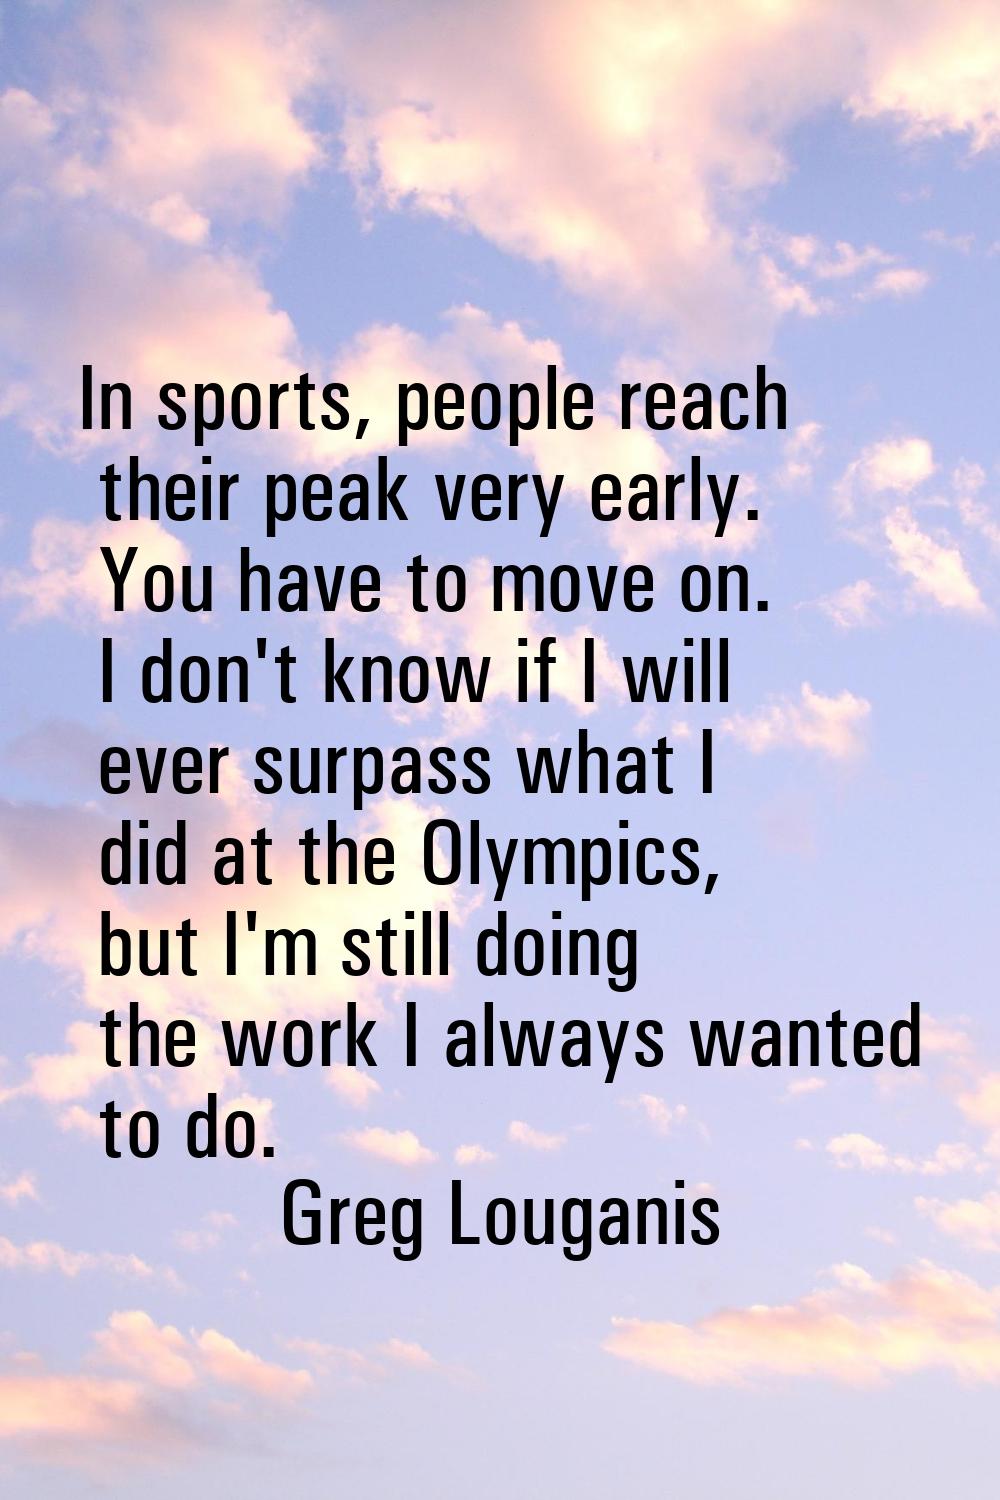 In sports, people reach their peak very early. You have to move on. I don't know if I will ever sur